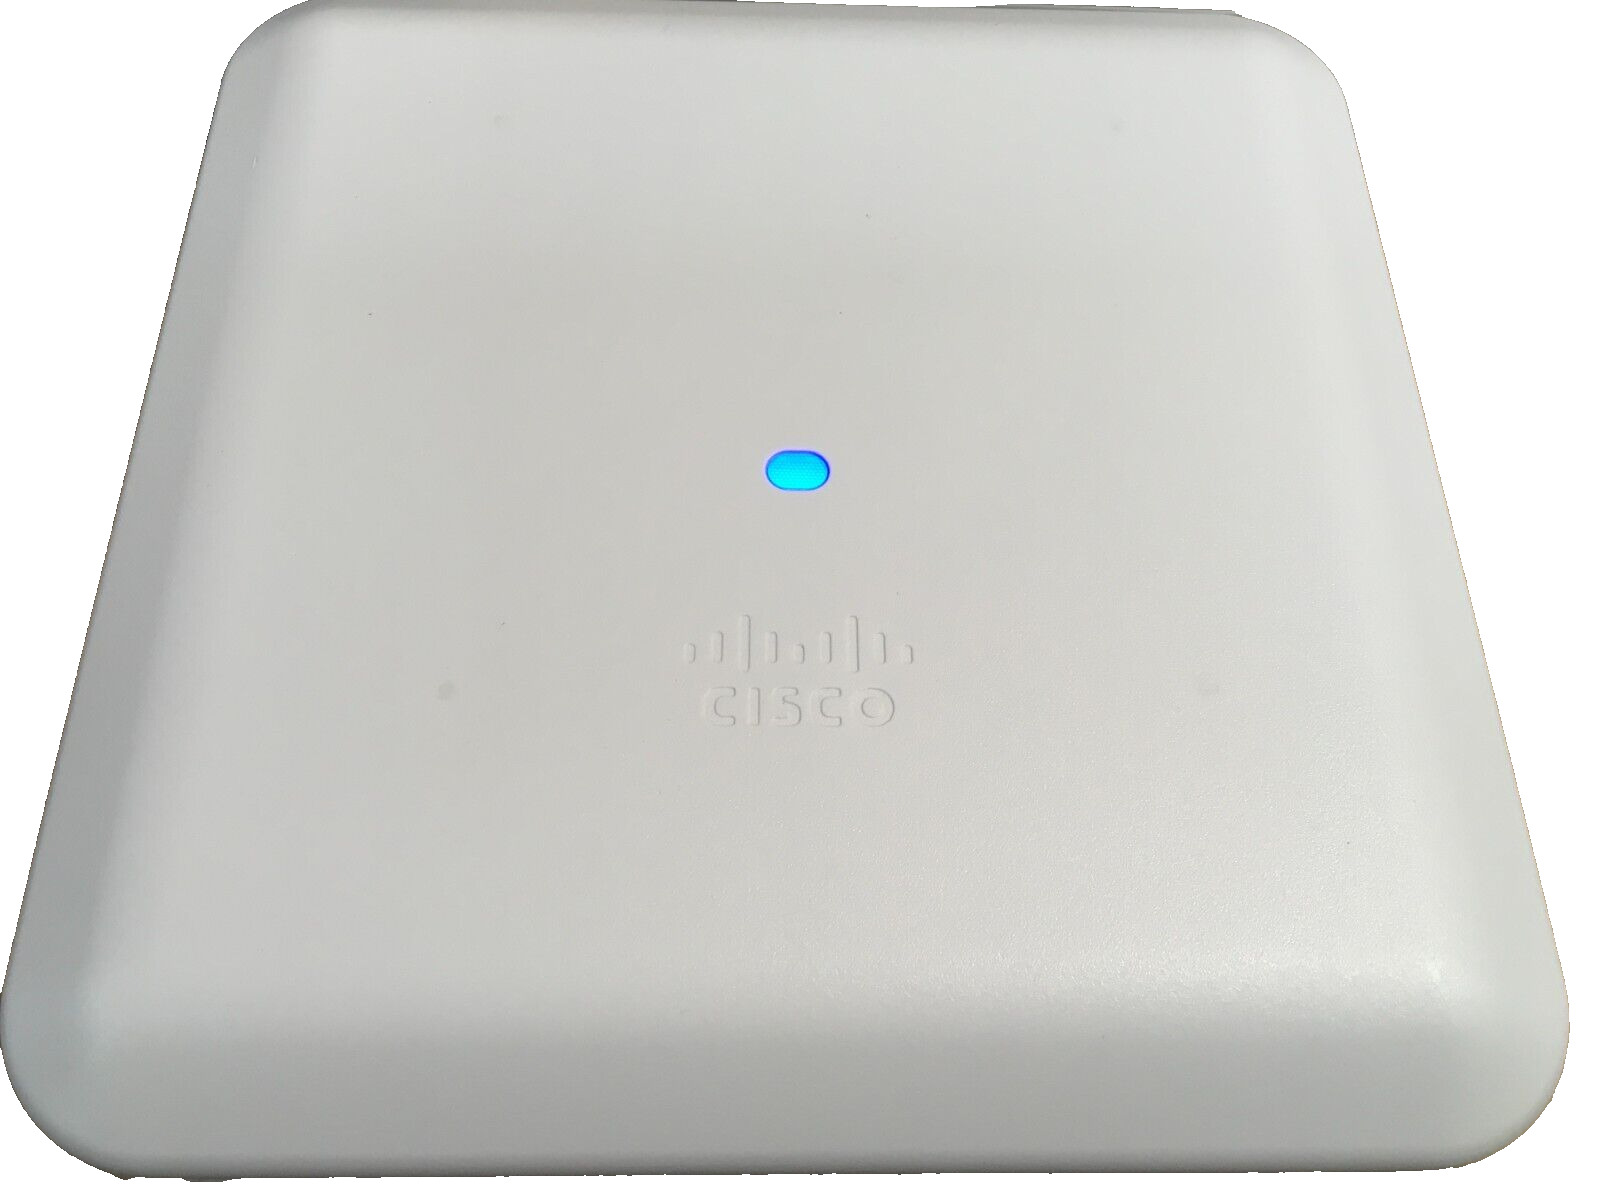 TESTED Cisco AIR-AP3802I-B-K9 Aironet 3802 Series Wireless Access Point Warranty